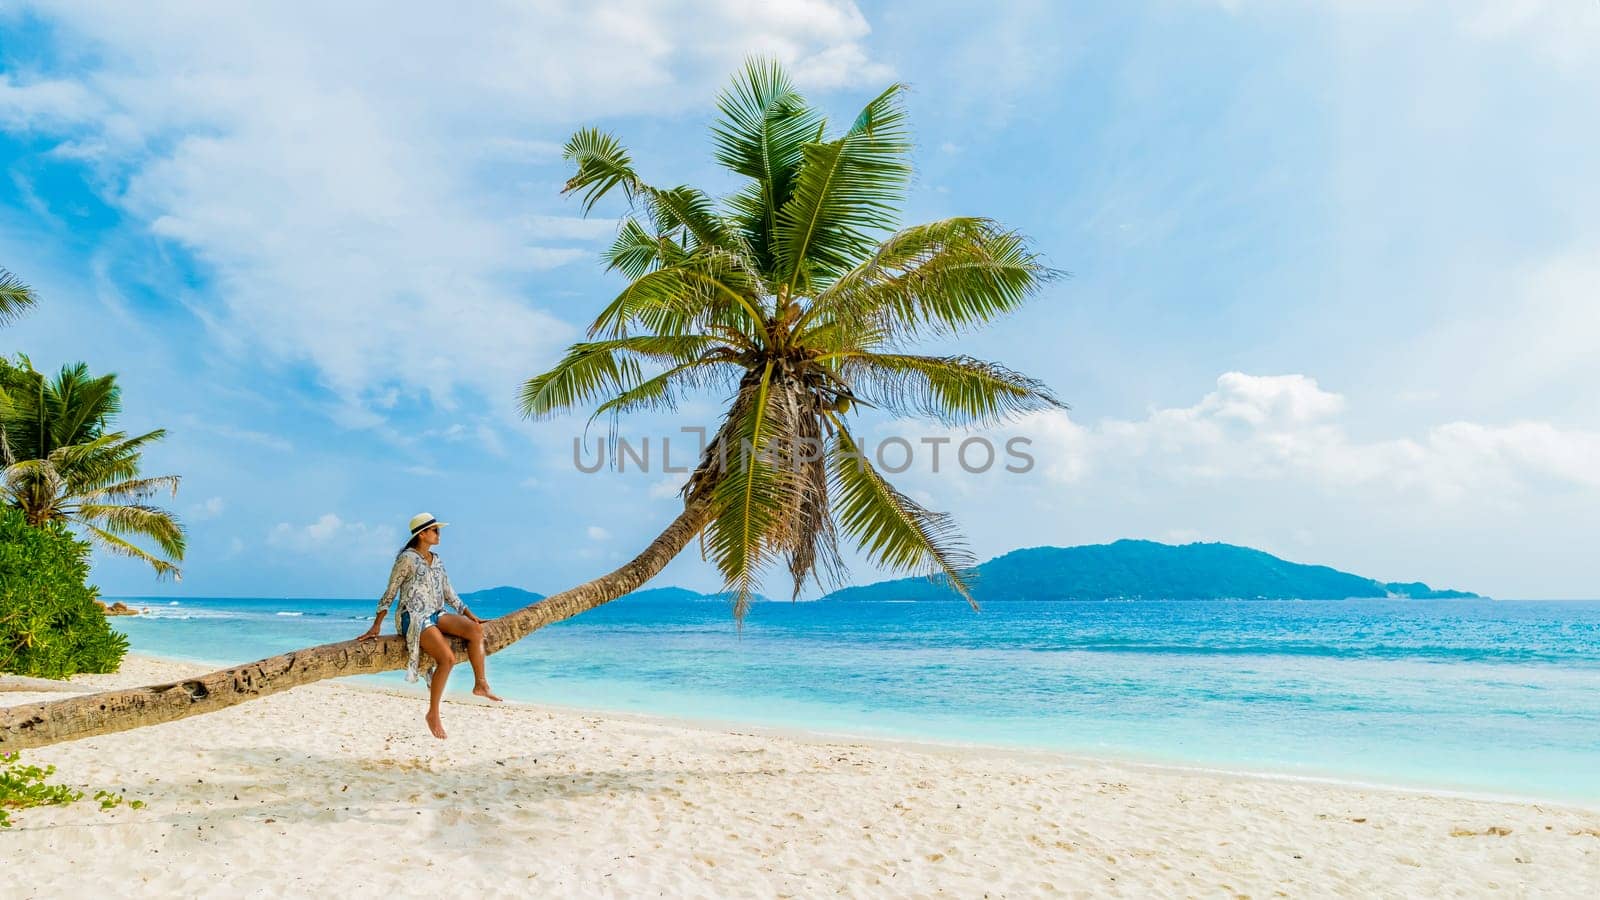 Young woman relaxing at a coconut palm tree on a white tropical beach at La Digue Seychelles Islands. Asian woman with hat sitting on a palm tree looking out over the ocean